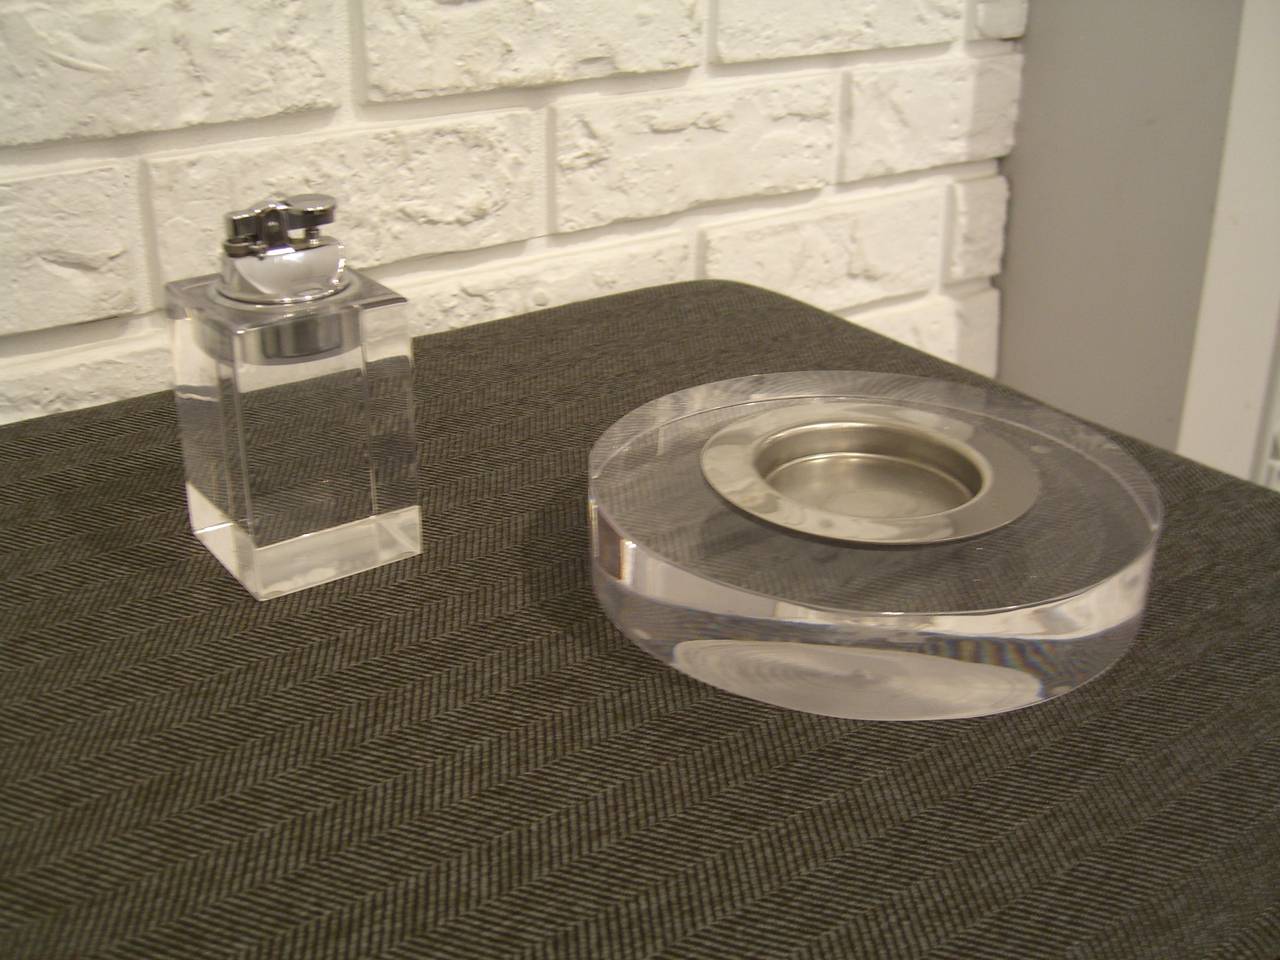 Lucite smoking set containing an ashtray with stainless steel insert and lighter. Lighter does work with fluid. Lighter is 4.5 H x 2.25 W.